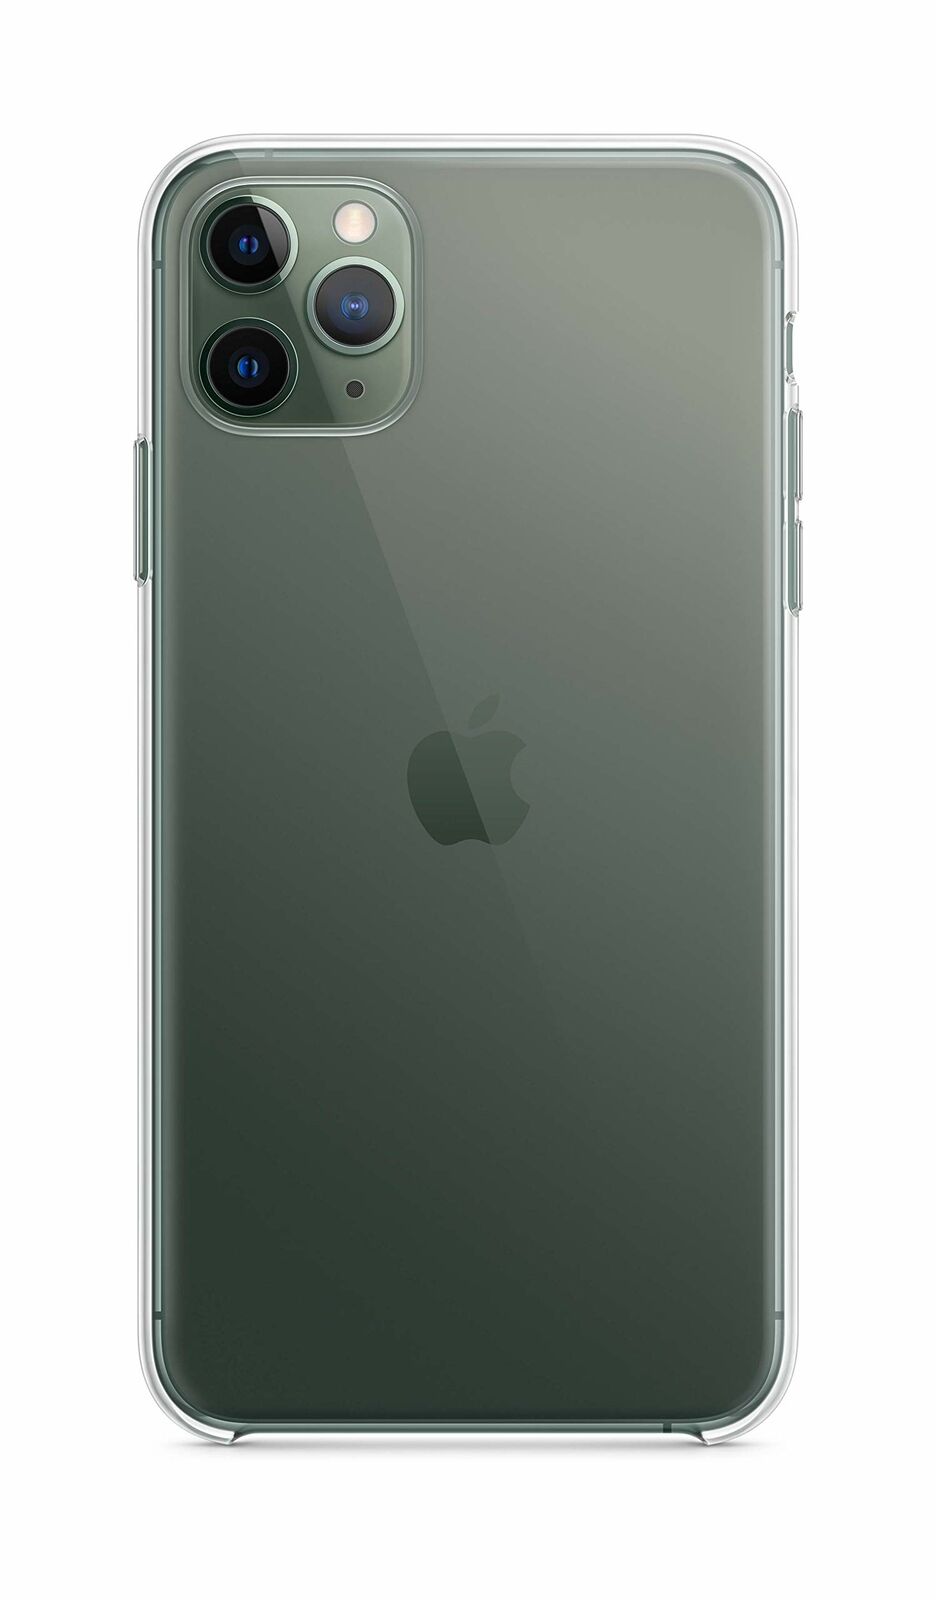 Apple Clear Case (for iPhone 11 Pro Max) iPhone 11 Pro Max)